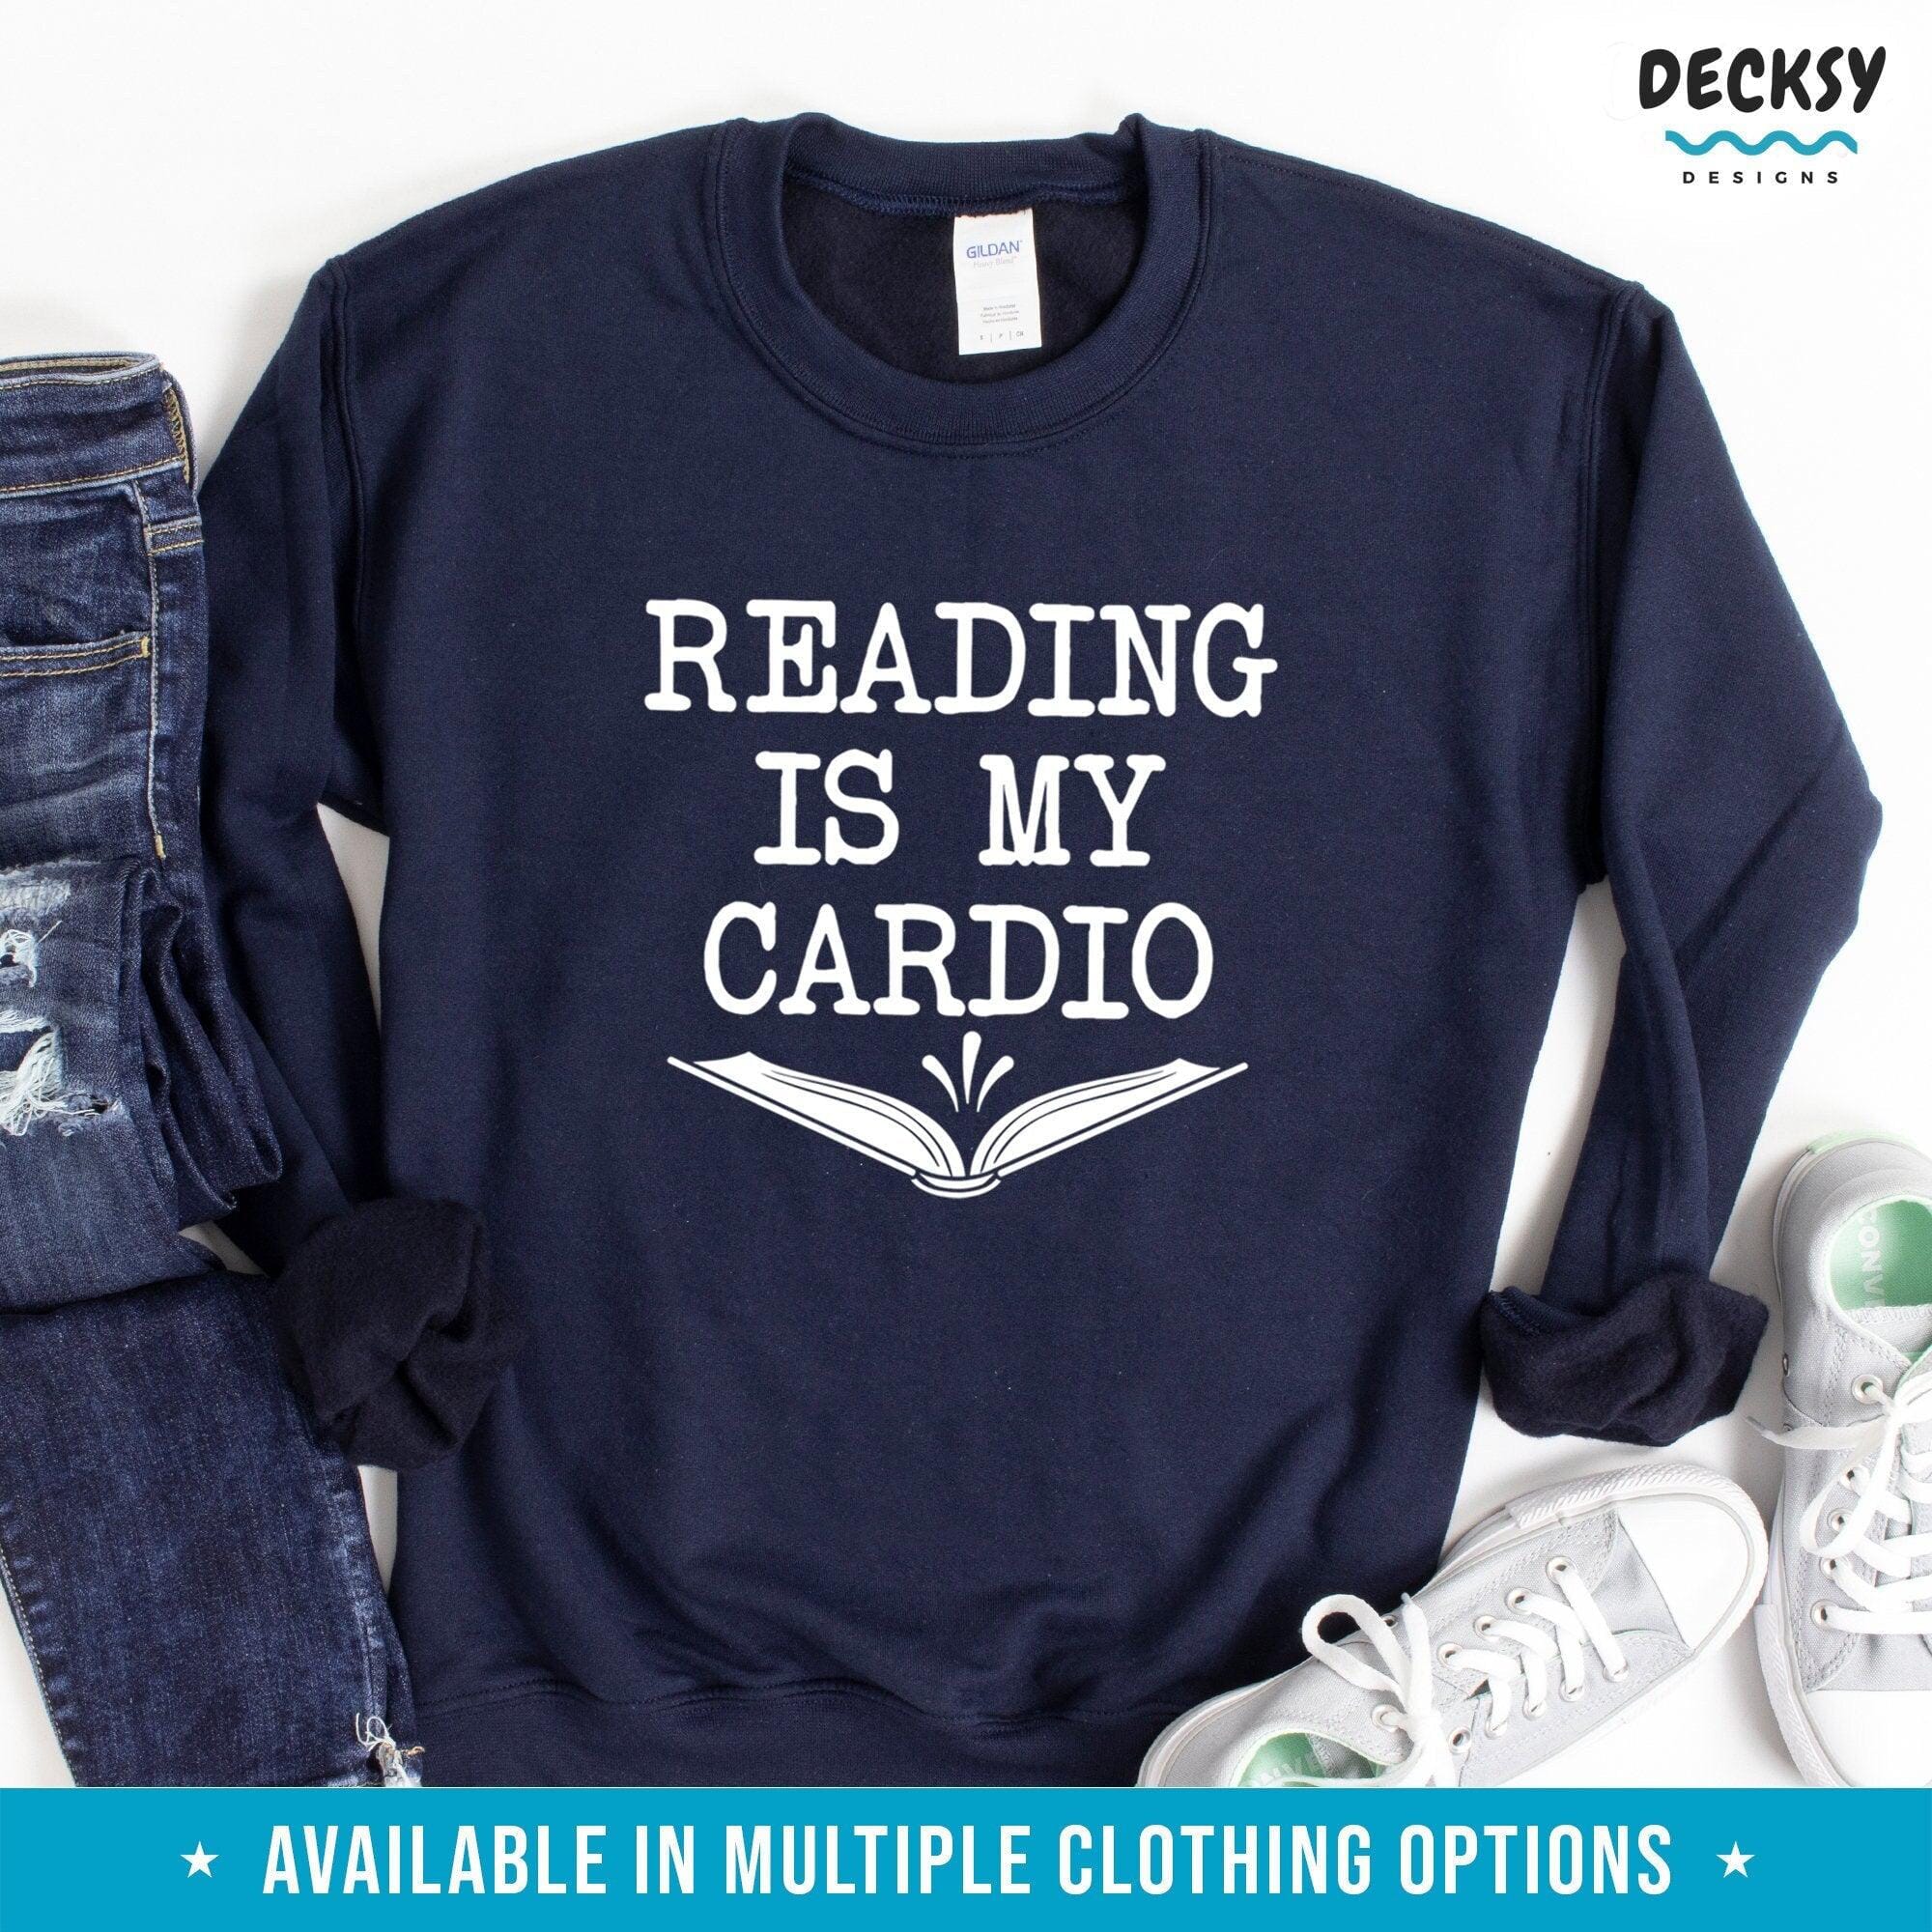 Reading Lover Shirt, Reader Gift-Clothing:Gender-Neutral Adult Clothing:Tops & Tees:T-shirts:Graphic Tees-DecksyDesigns